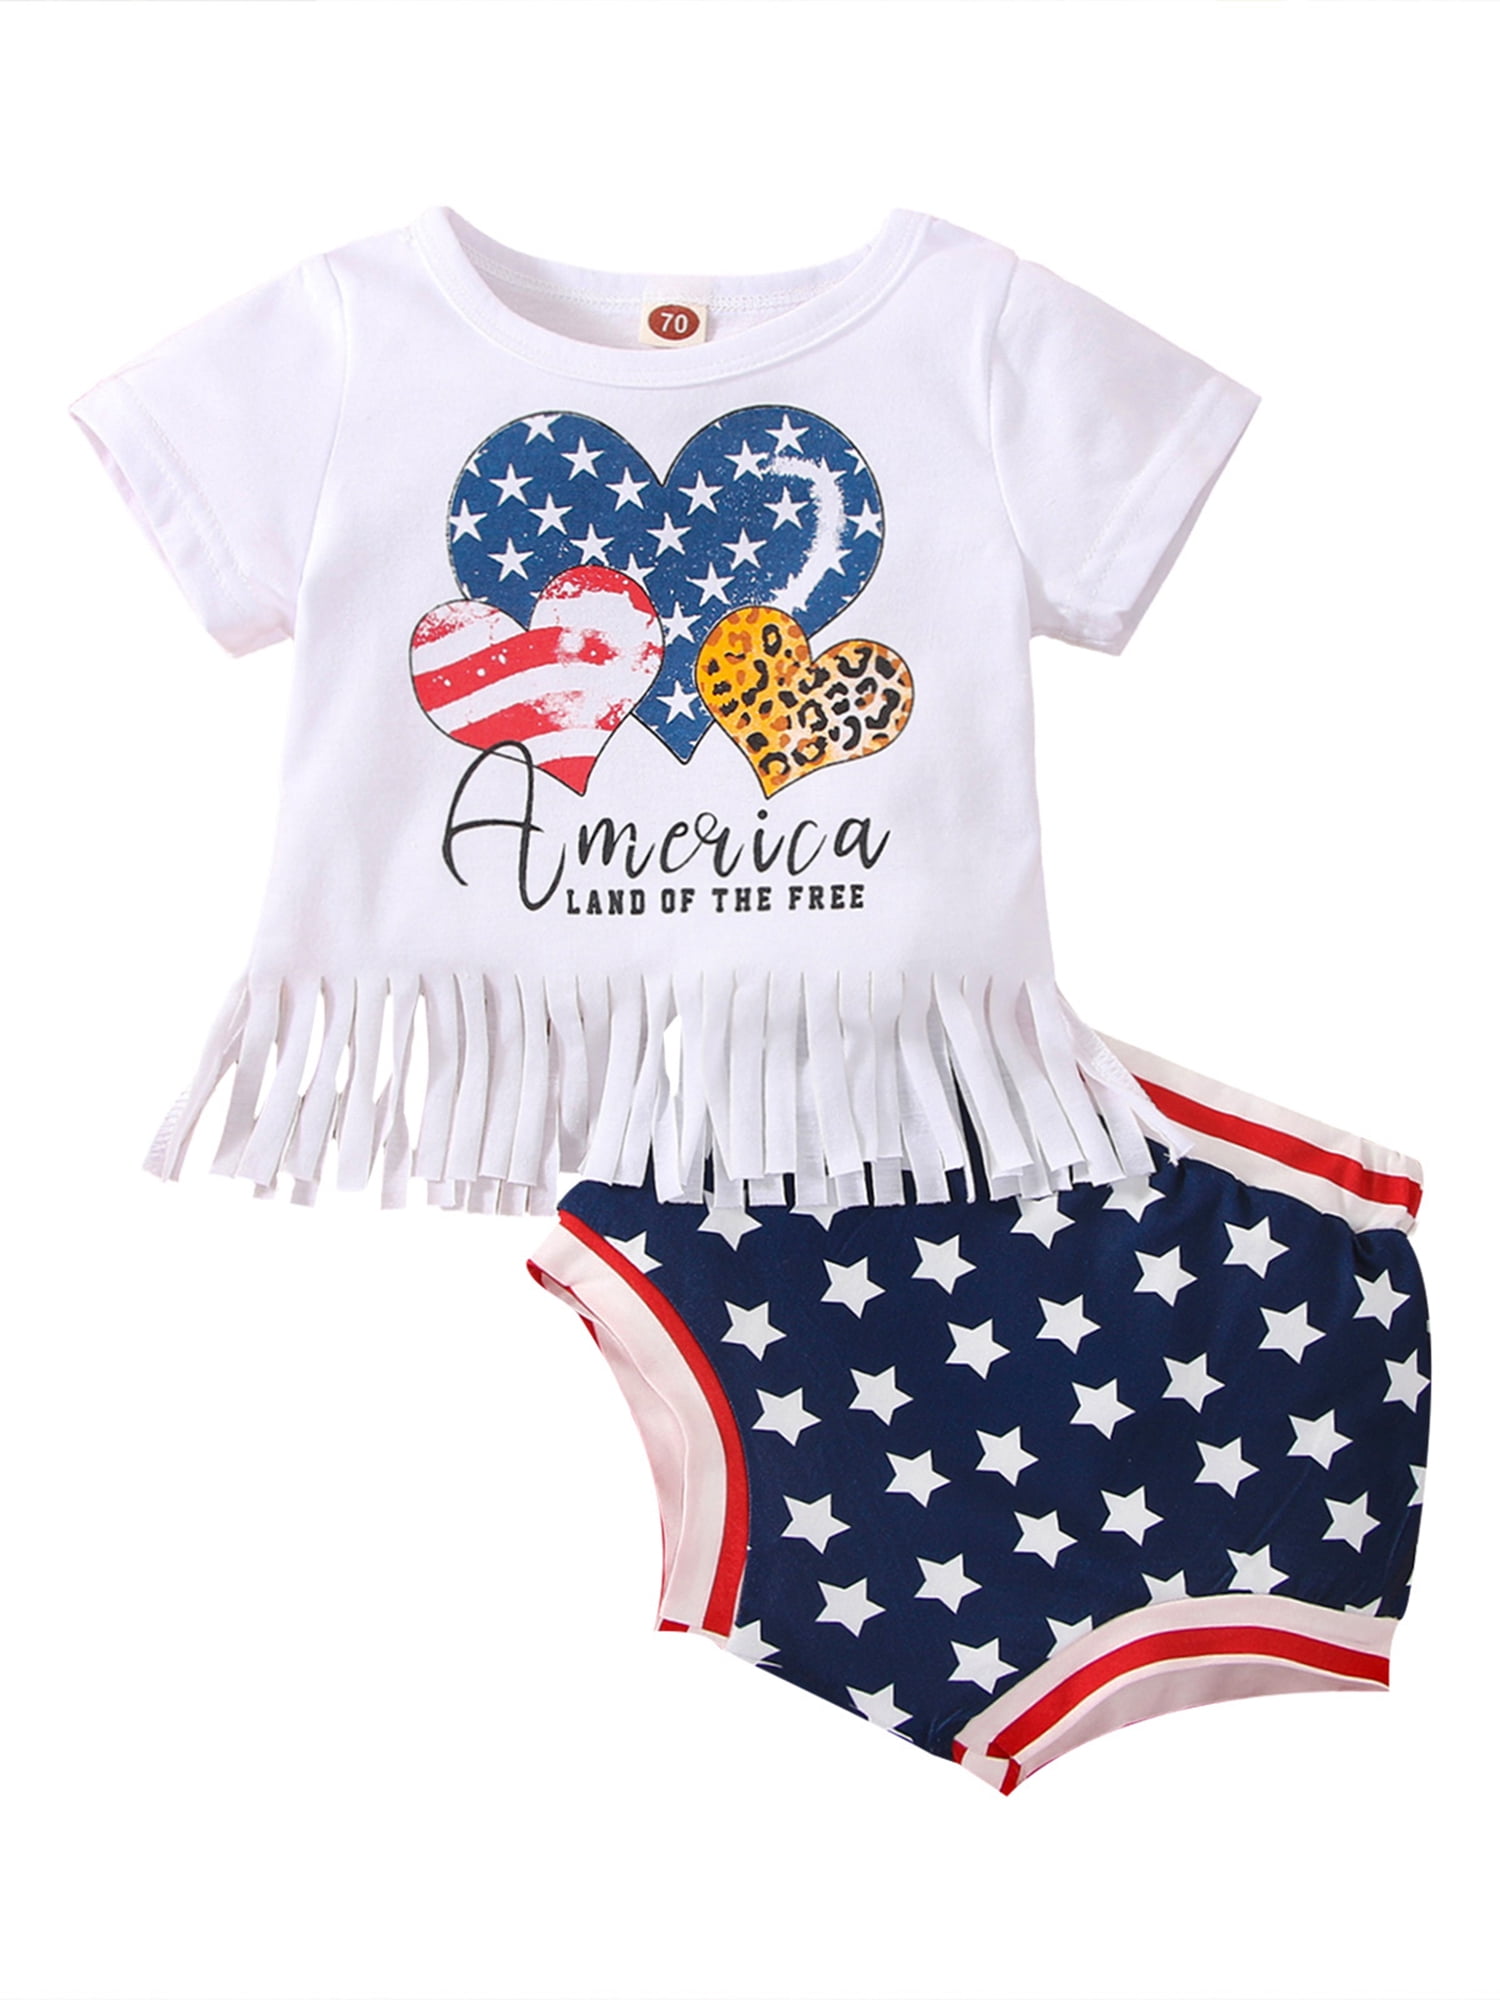 YOUNGER STAR Newborn Infanty Baby 2pcs Summer Outfits Cotton Romper US Flag Shorts My First 4th of July Independence Day